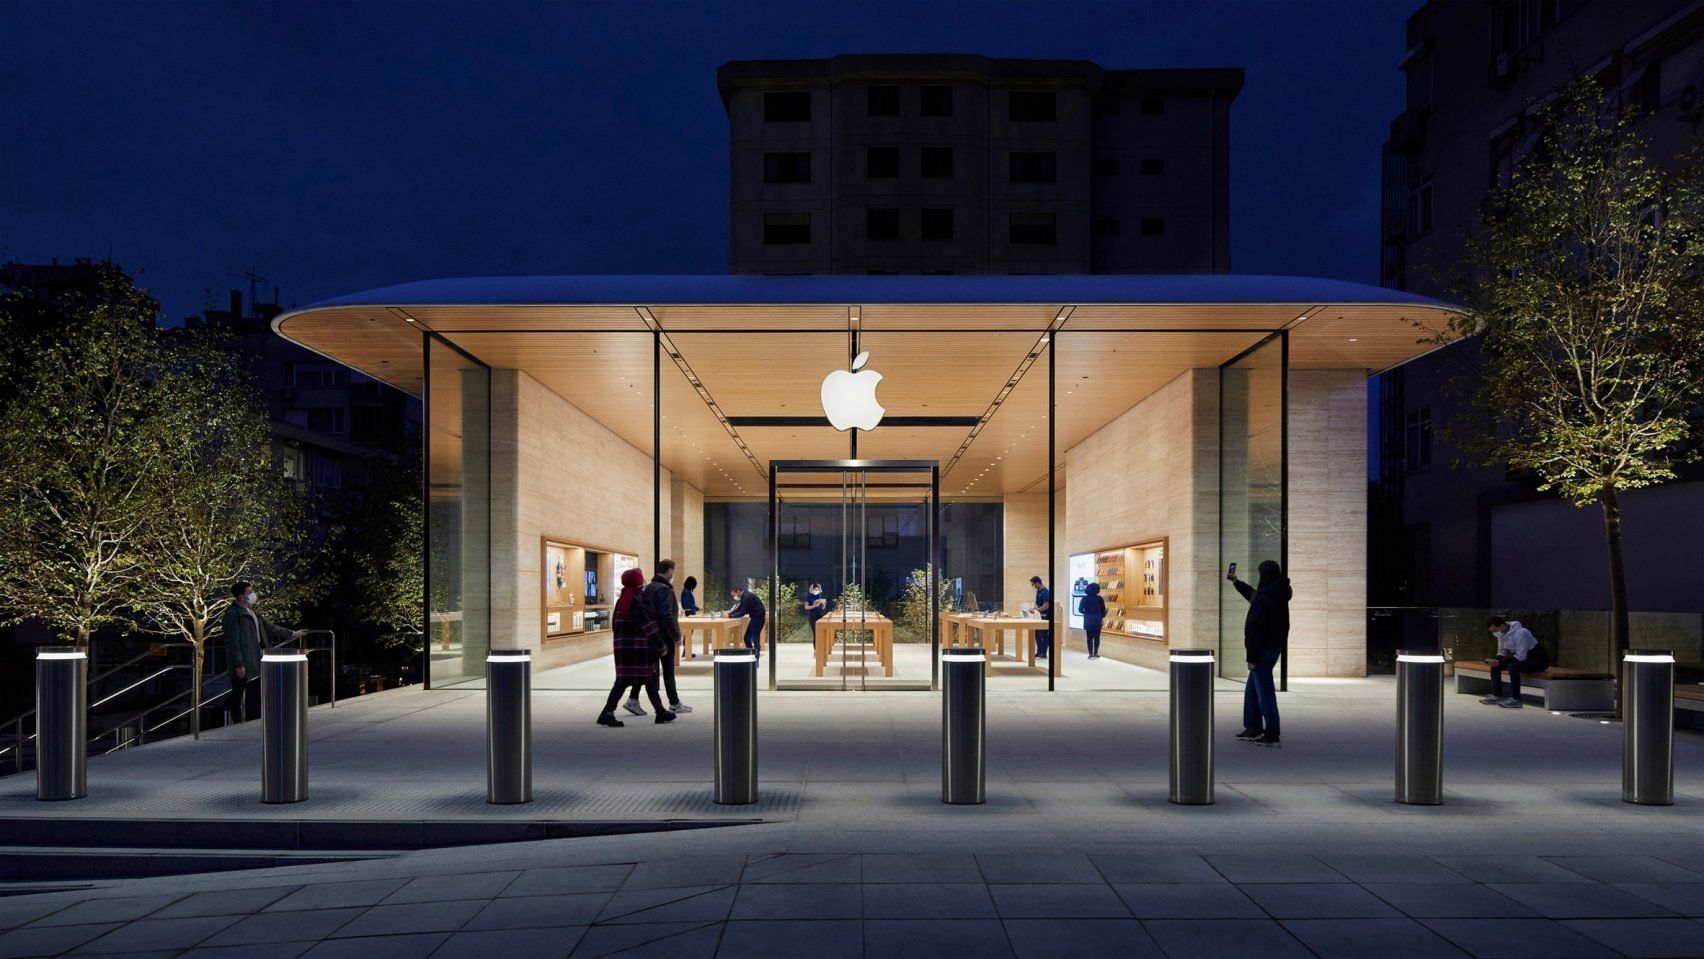 Apple has sealed its new Istanbul store in glass